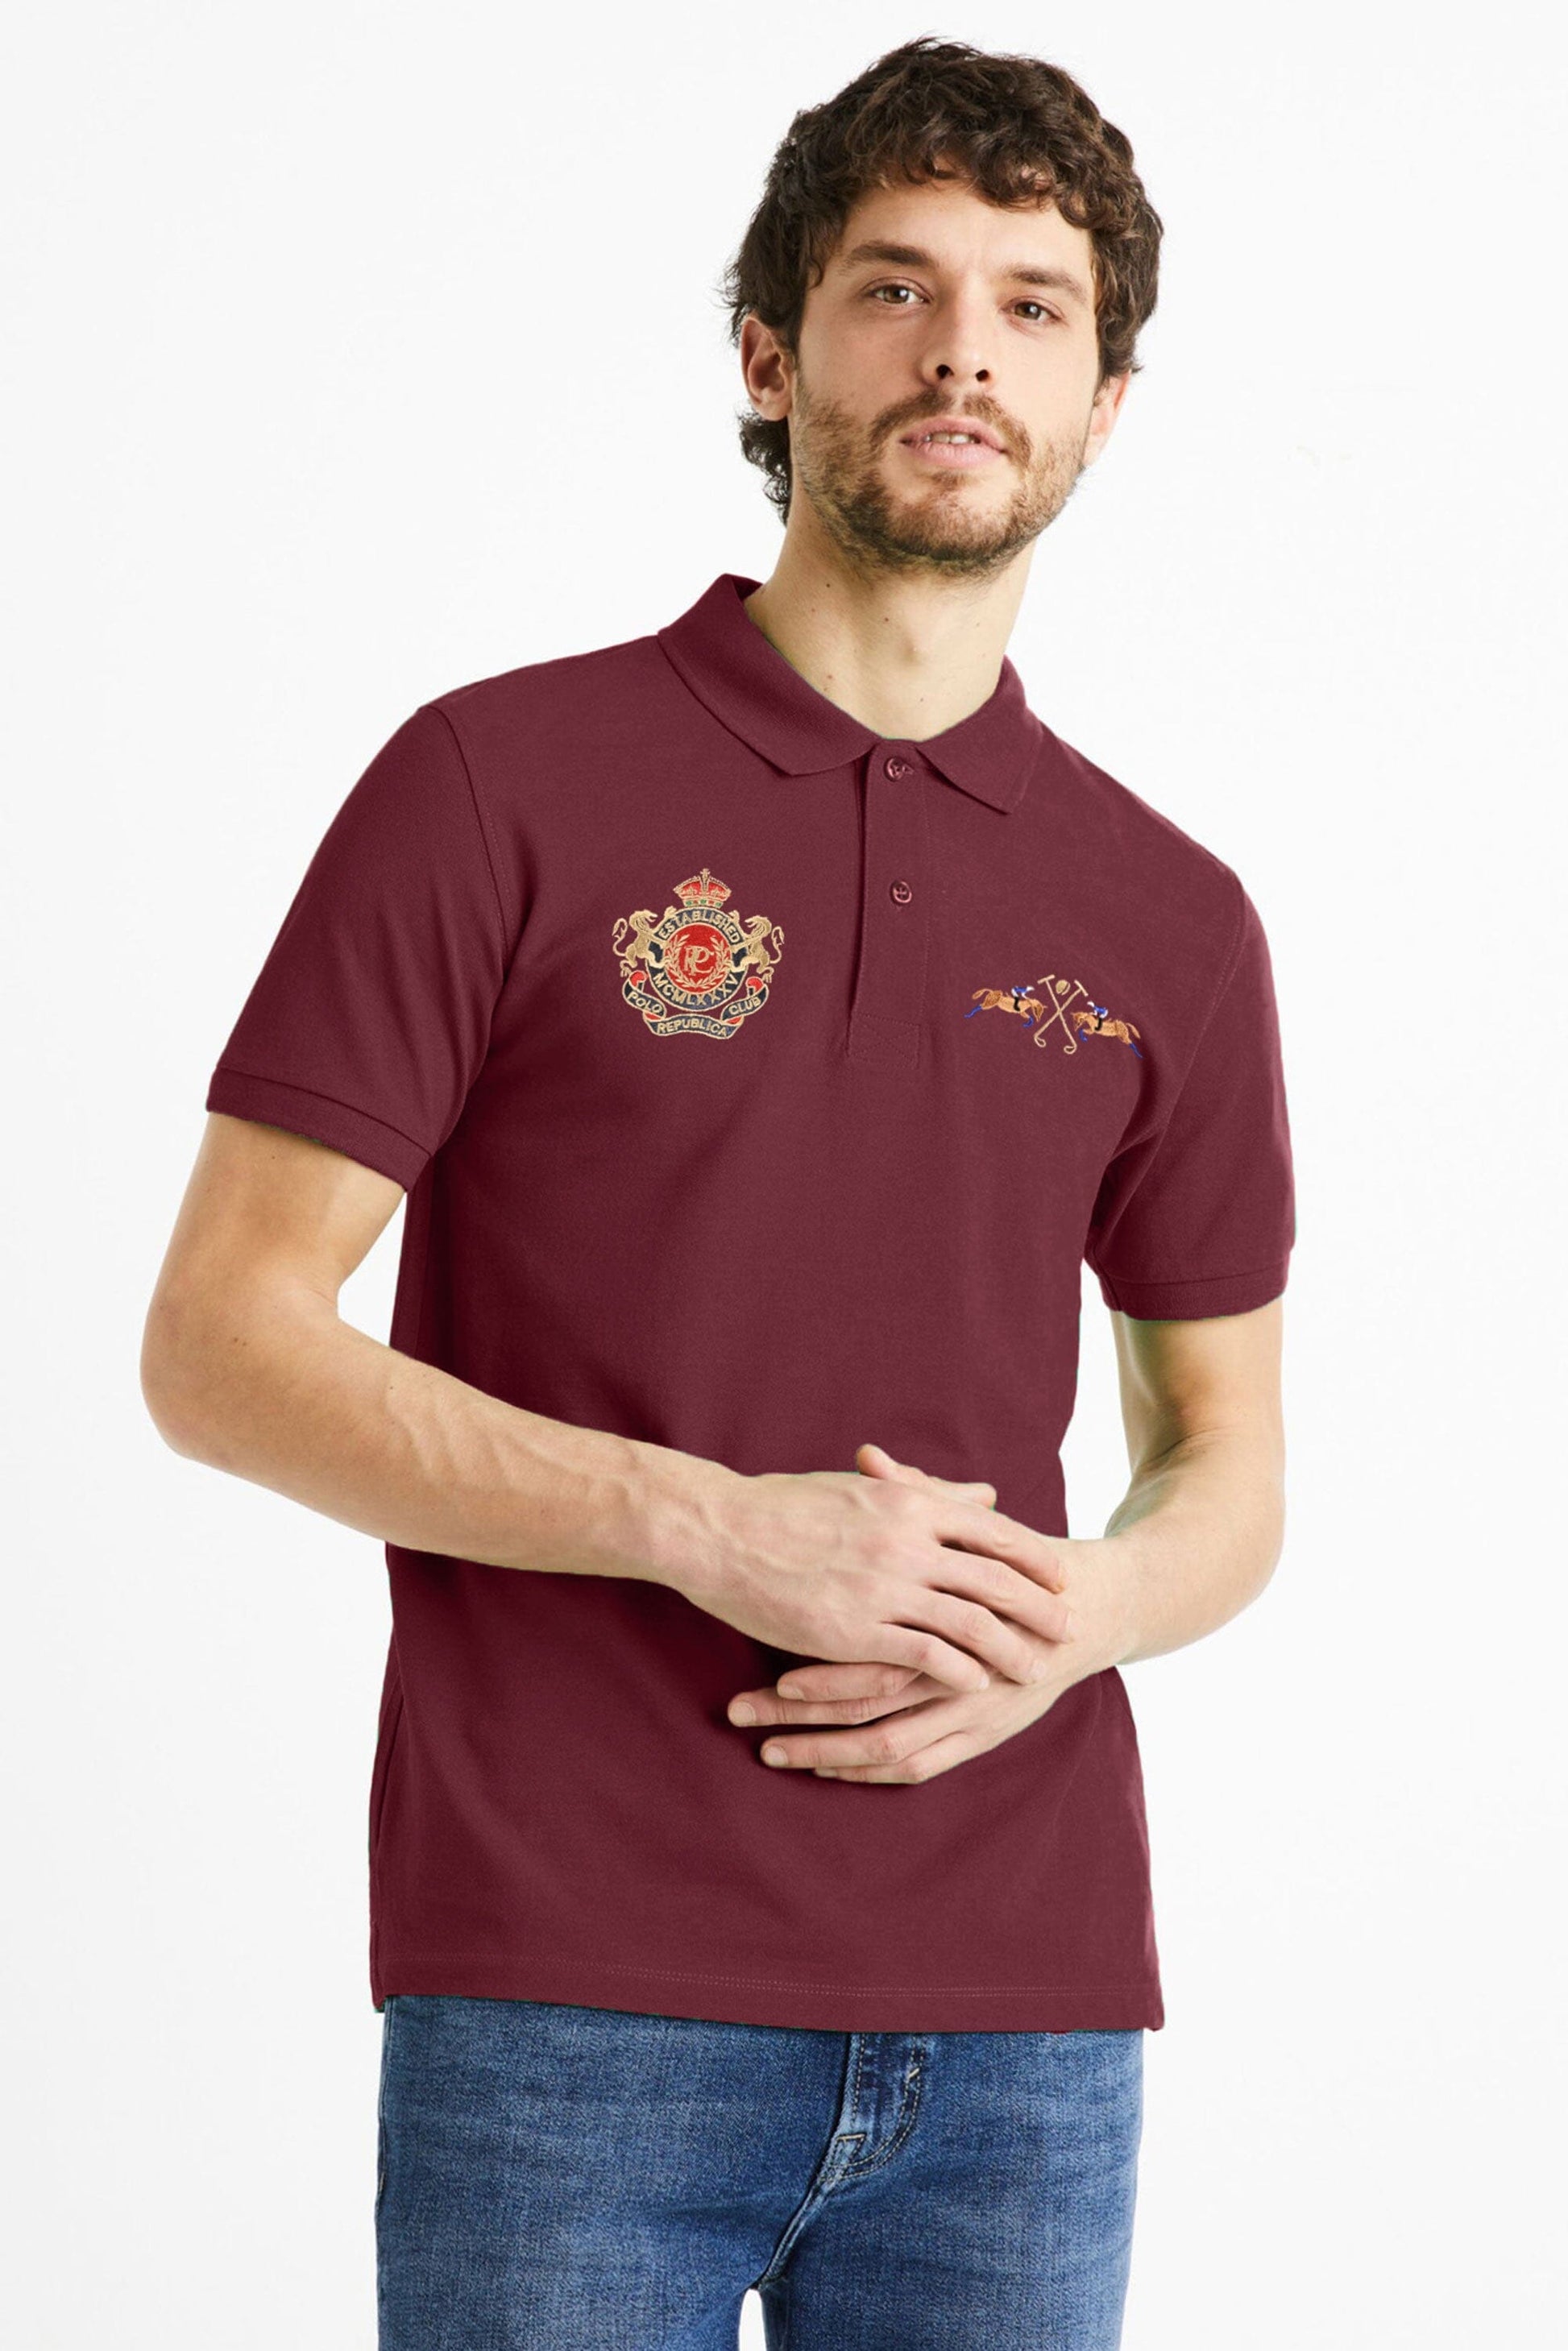 Polo Republica Men's Double Pony & PR Lions Embroidered Short Sleeve Polo Shirt